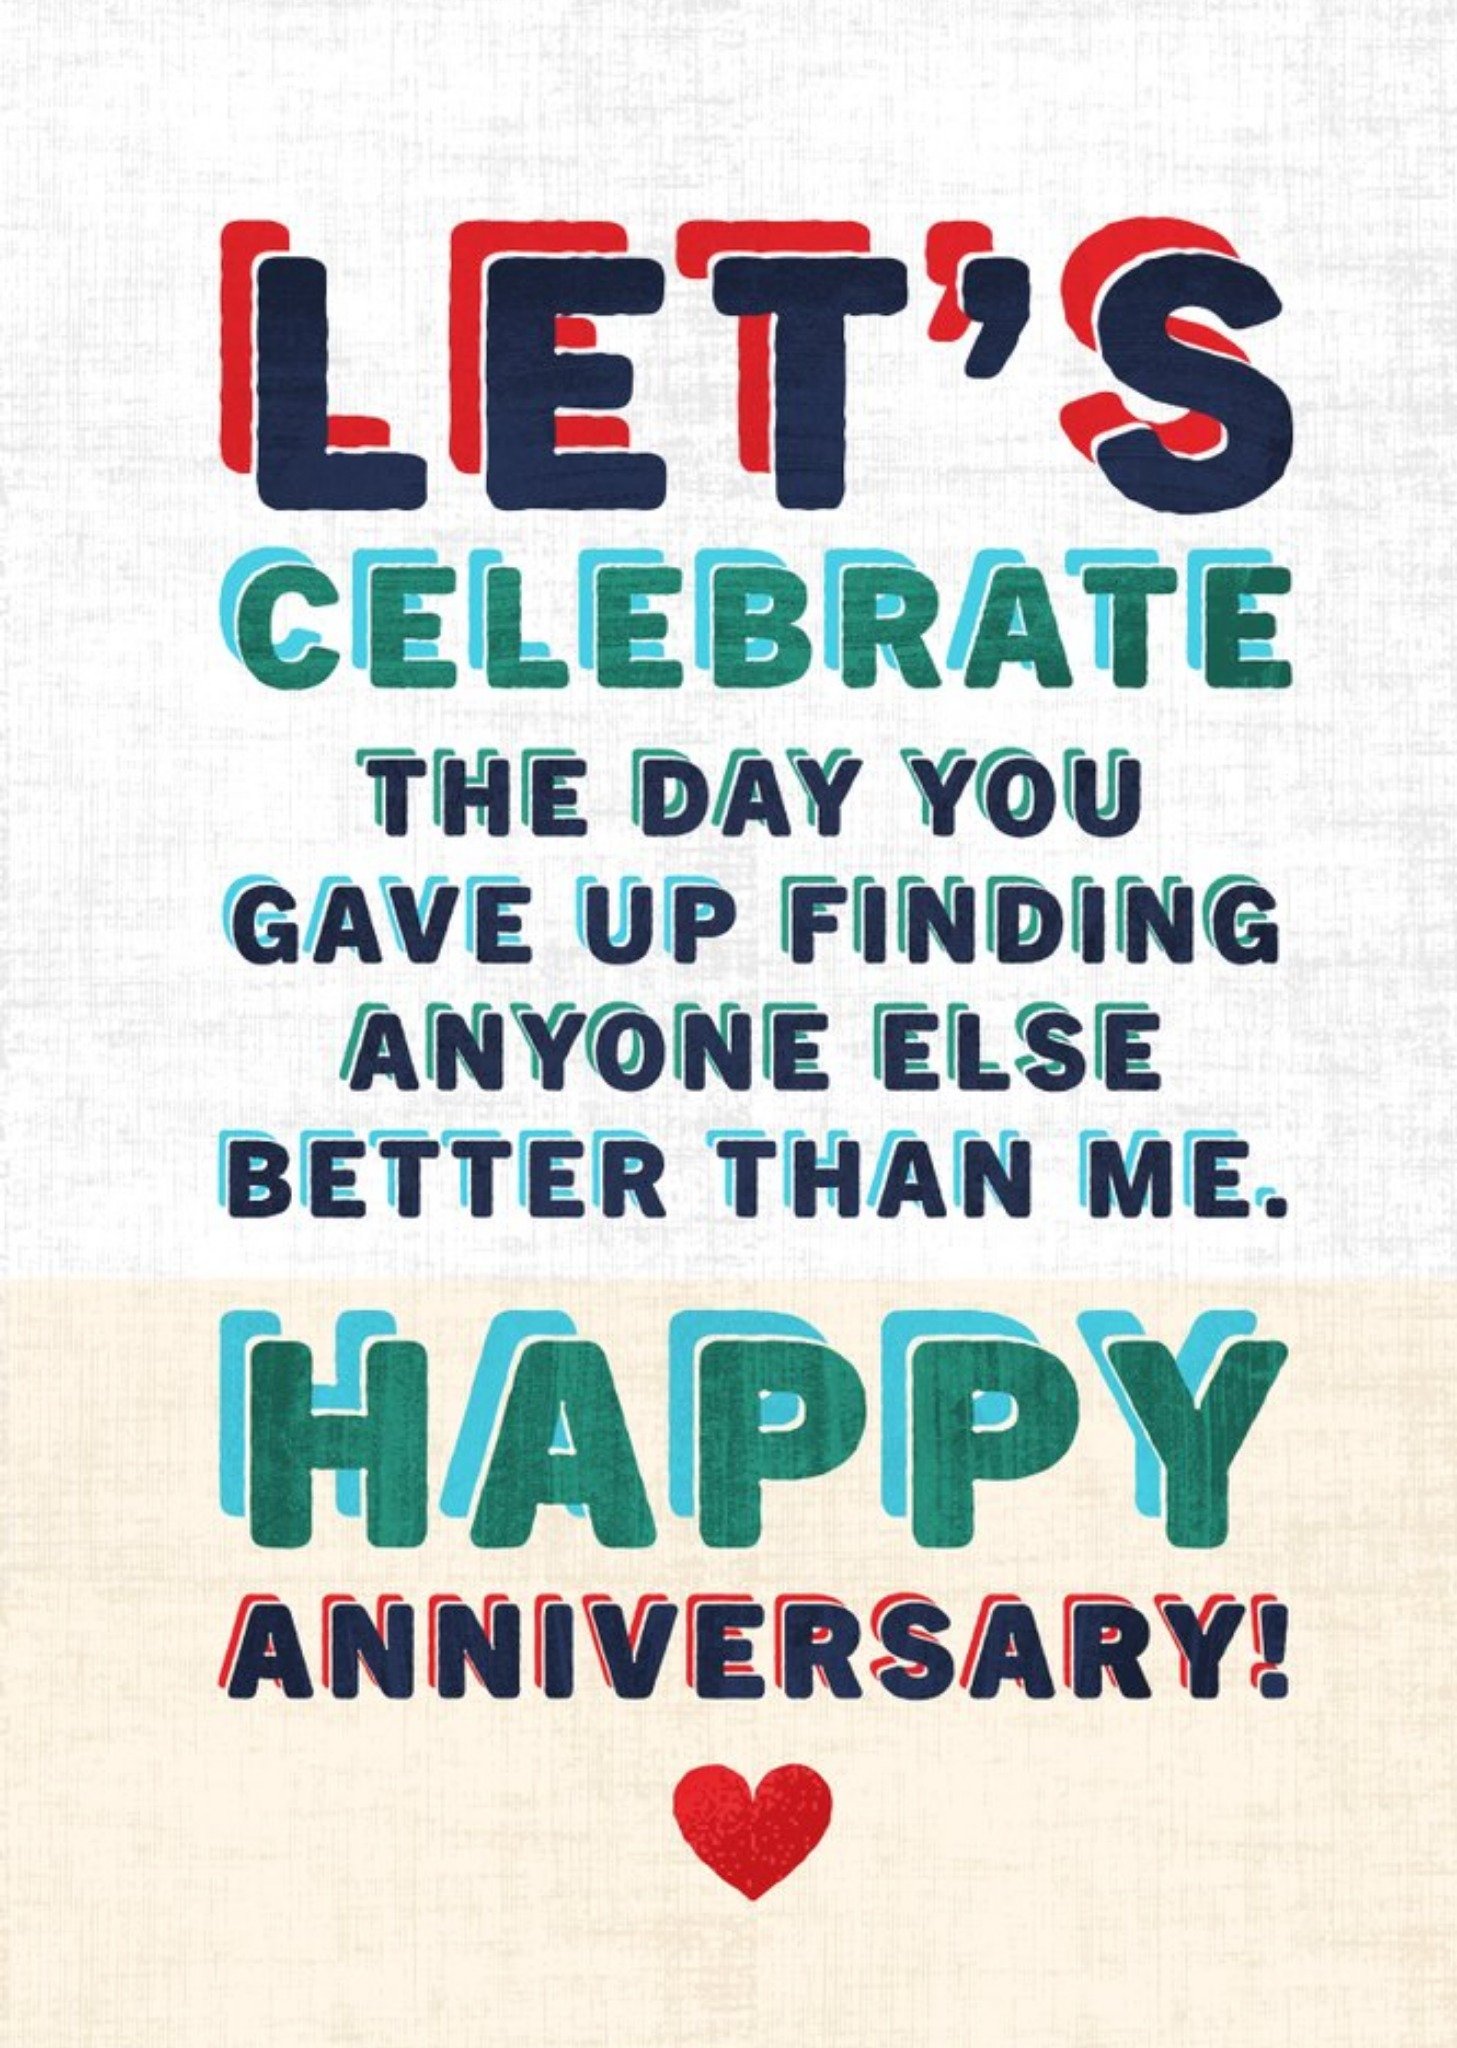 Moonpig Let's Celebrate The Day You've Gave Up Finding Anyone Better Than Me Anniversary Card Ecard